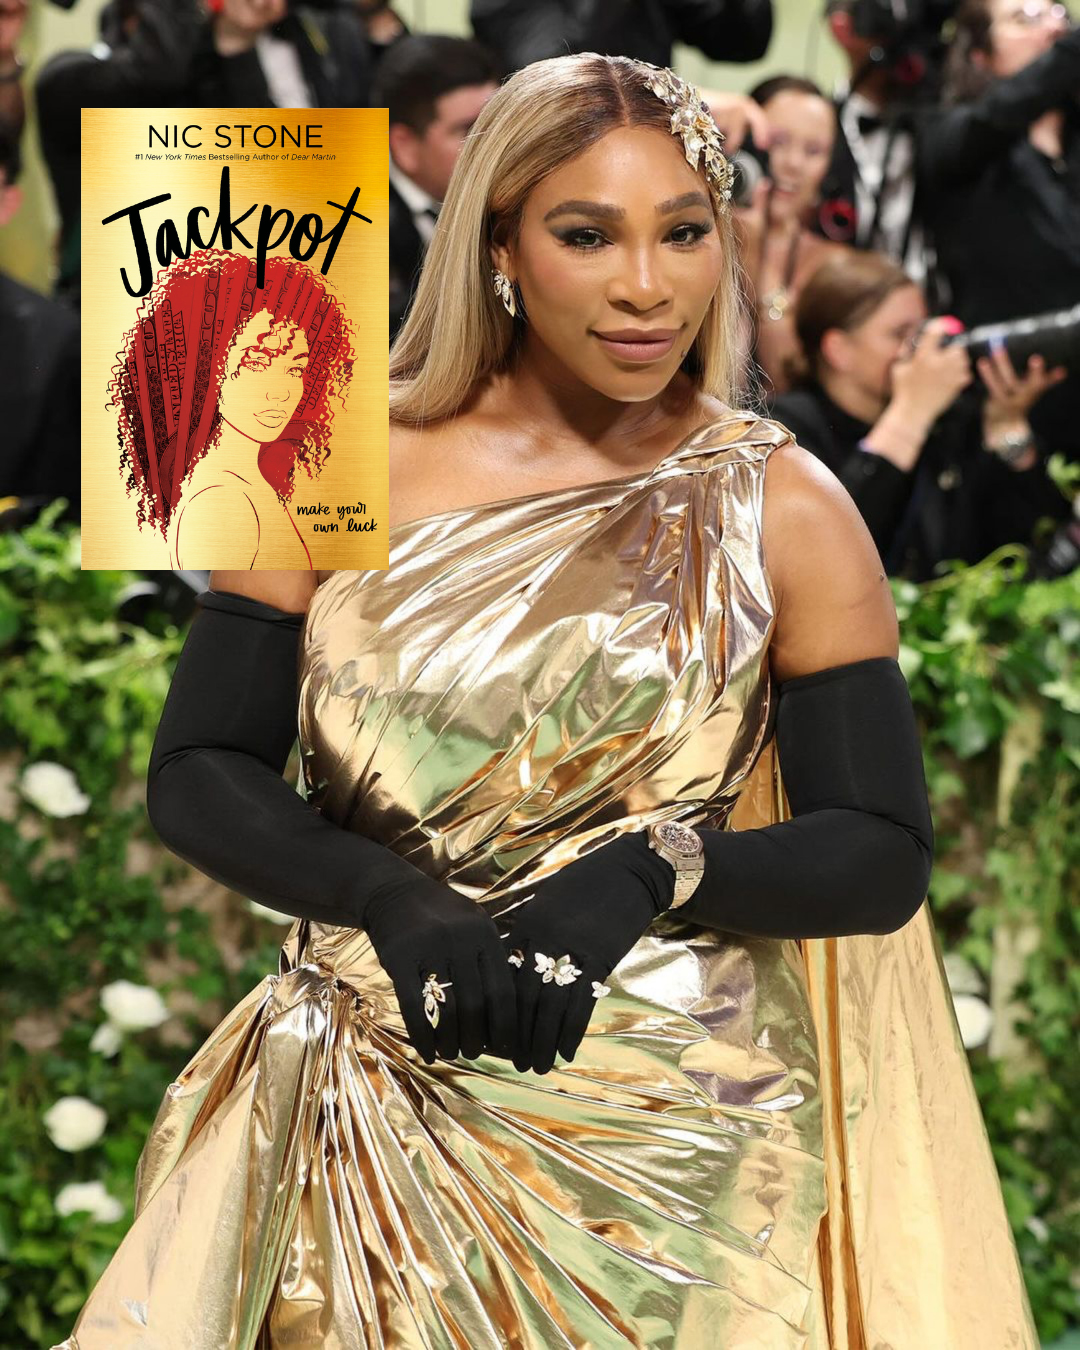 Serena Williams shimmers in gold, just like the shiny cover of JACKPOT. (Photo credit: @vanityfair on Instagram)